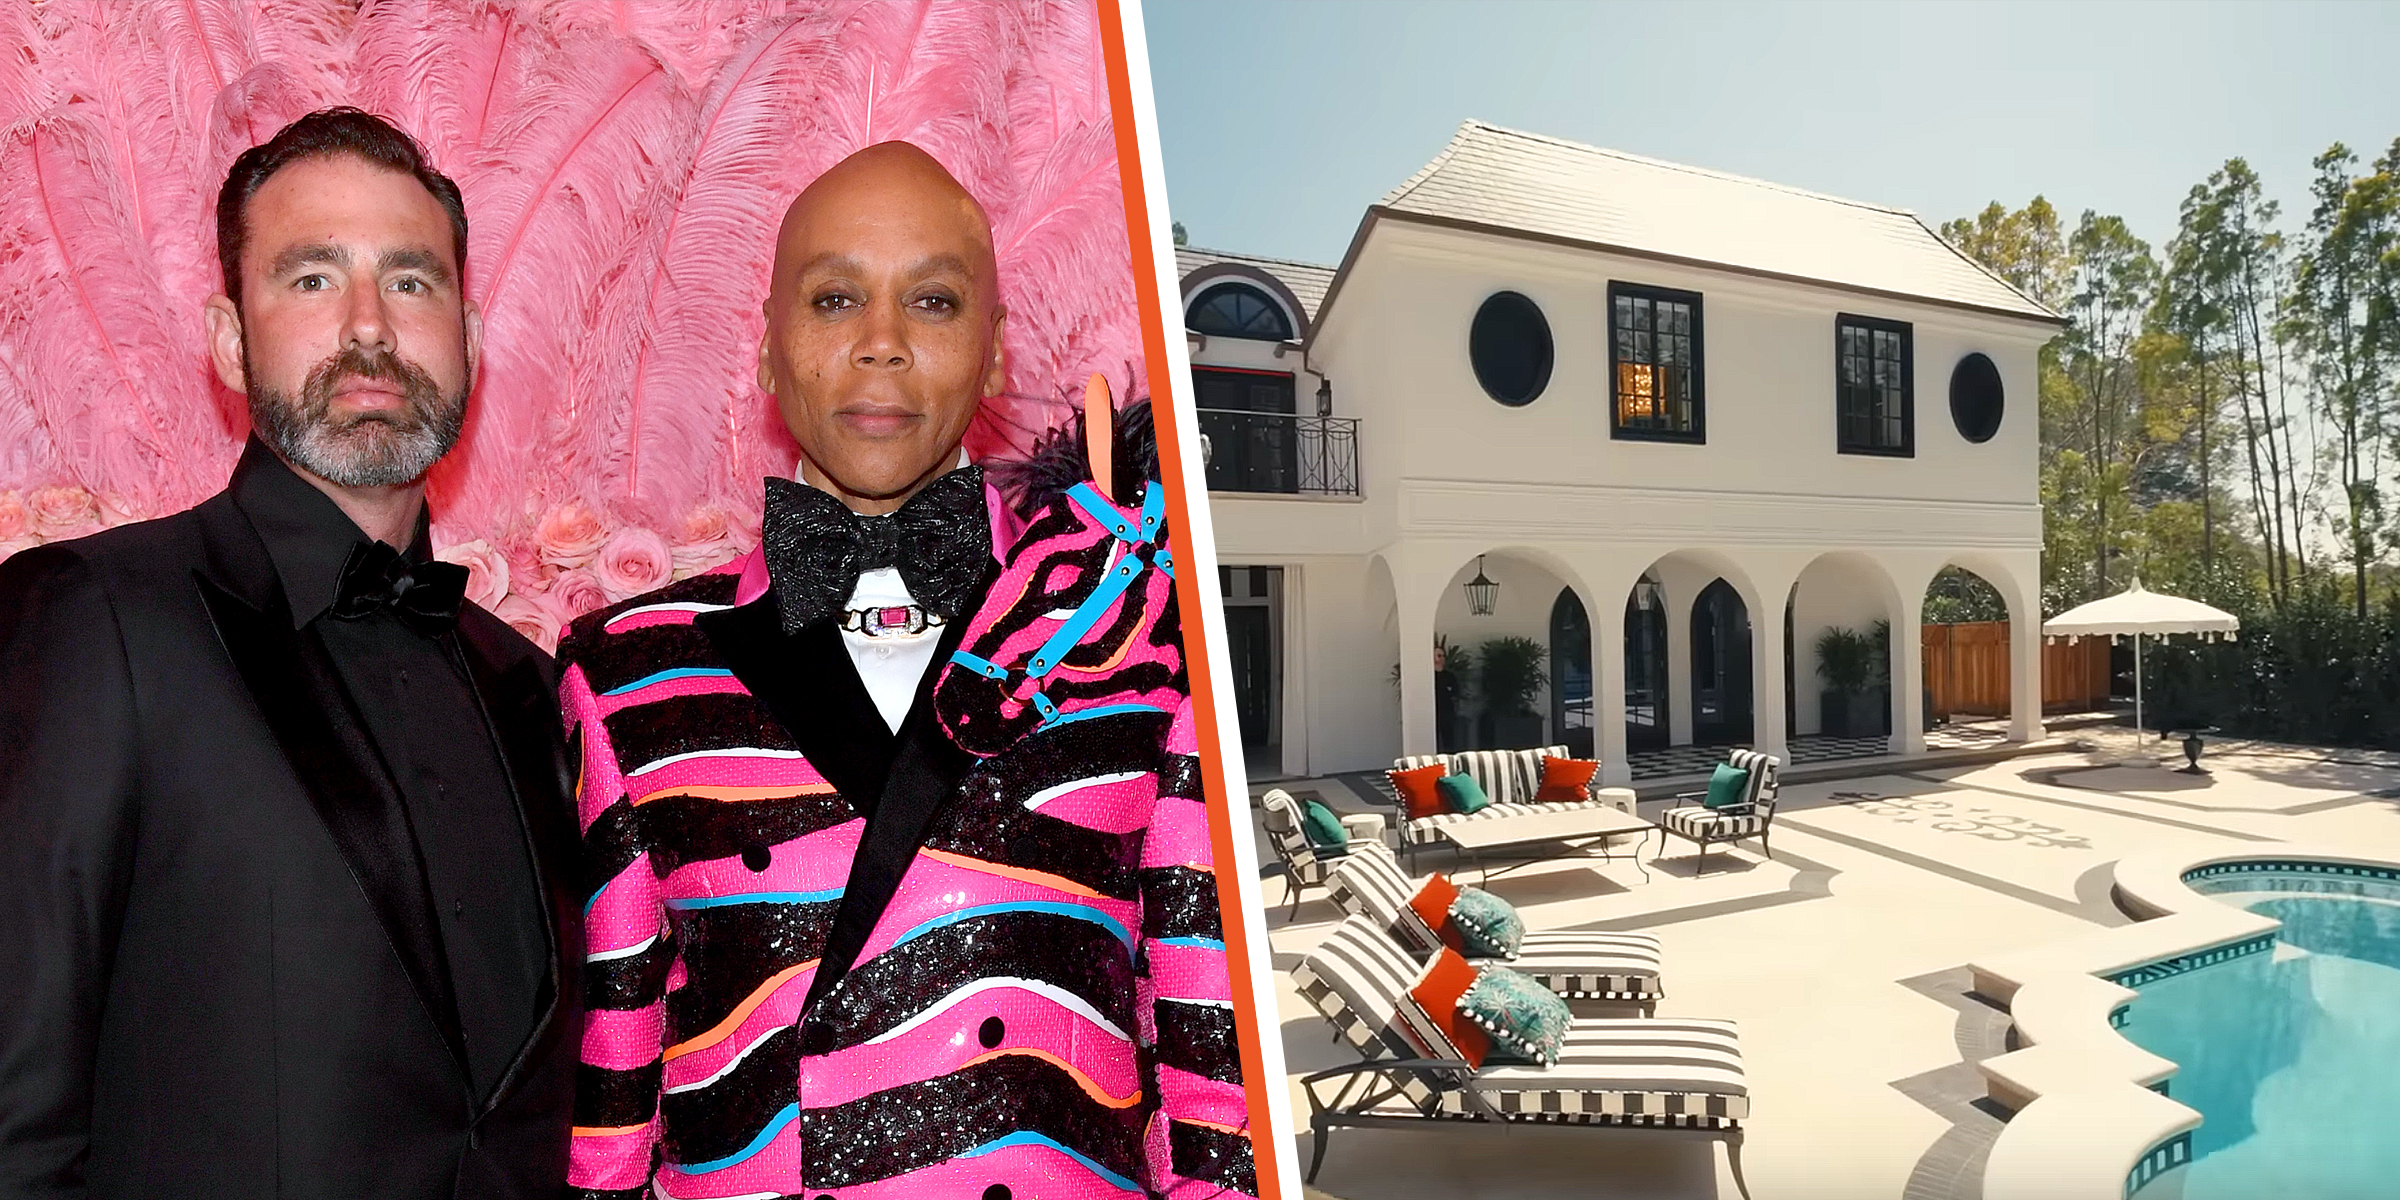 Georges LeBar and RuPaul | Georges LeBar and RuPaul's house | Source: Getty Images | https://www.youtube.com/@Archdigest